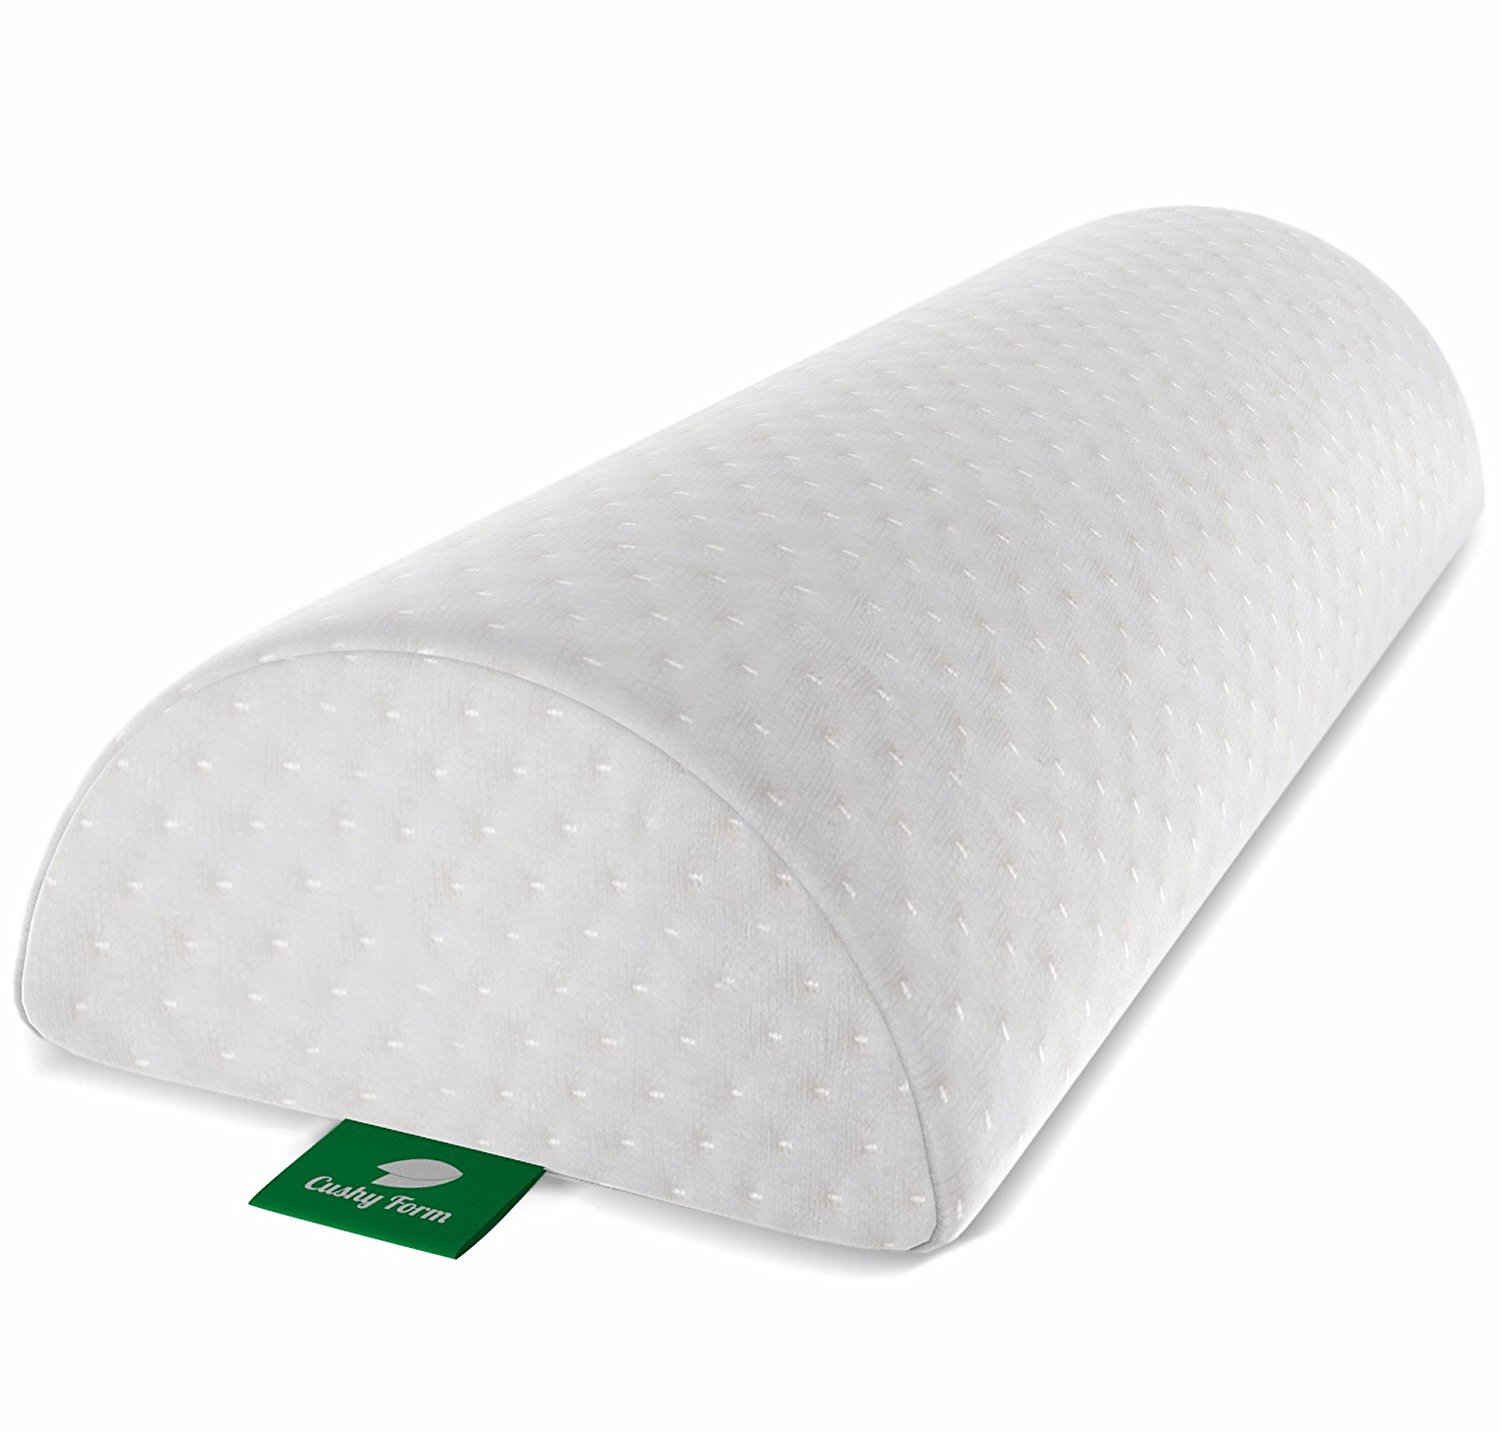 Cushy form back pain relief half-moon bolster/wedge – provides best support for sleeping on side or back – memory foam semi-roll leg/knee pillow with washable organic cotton cover (large, white)